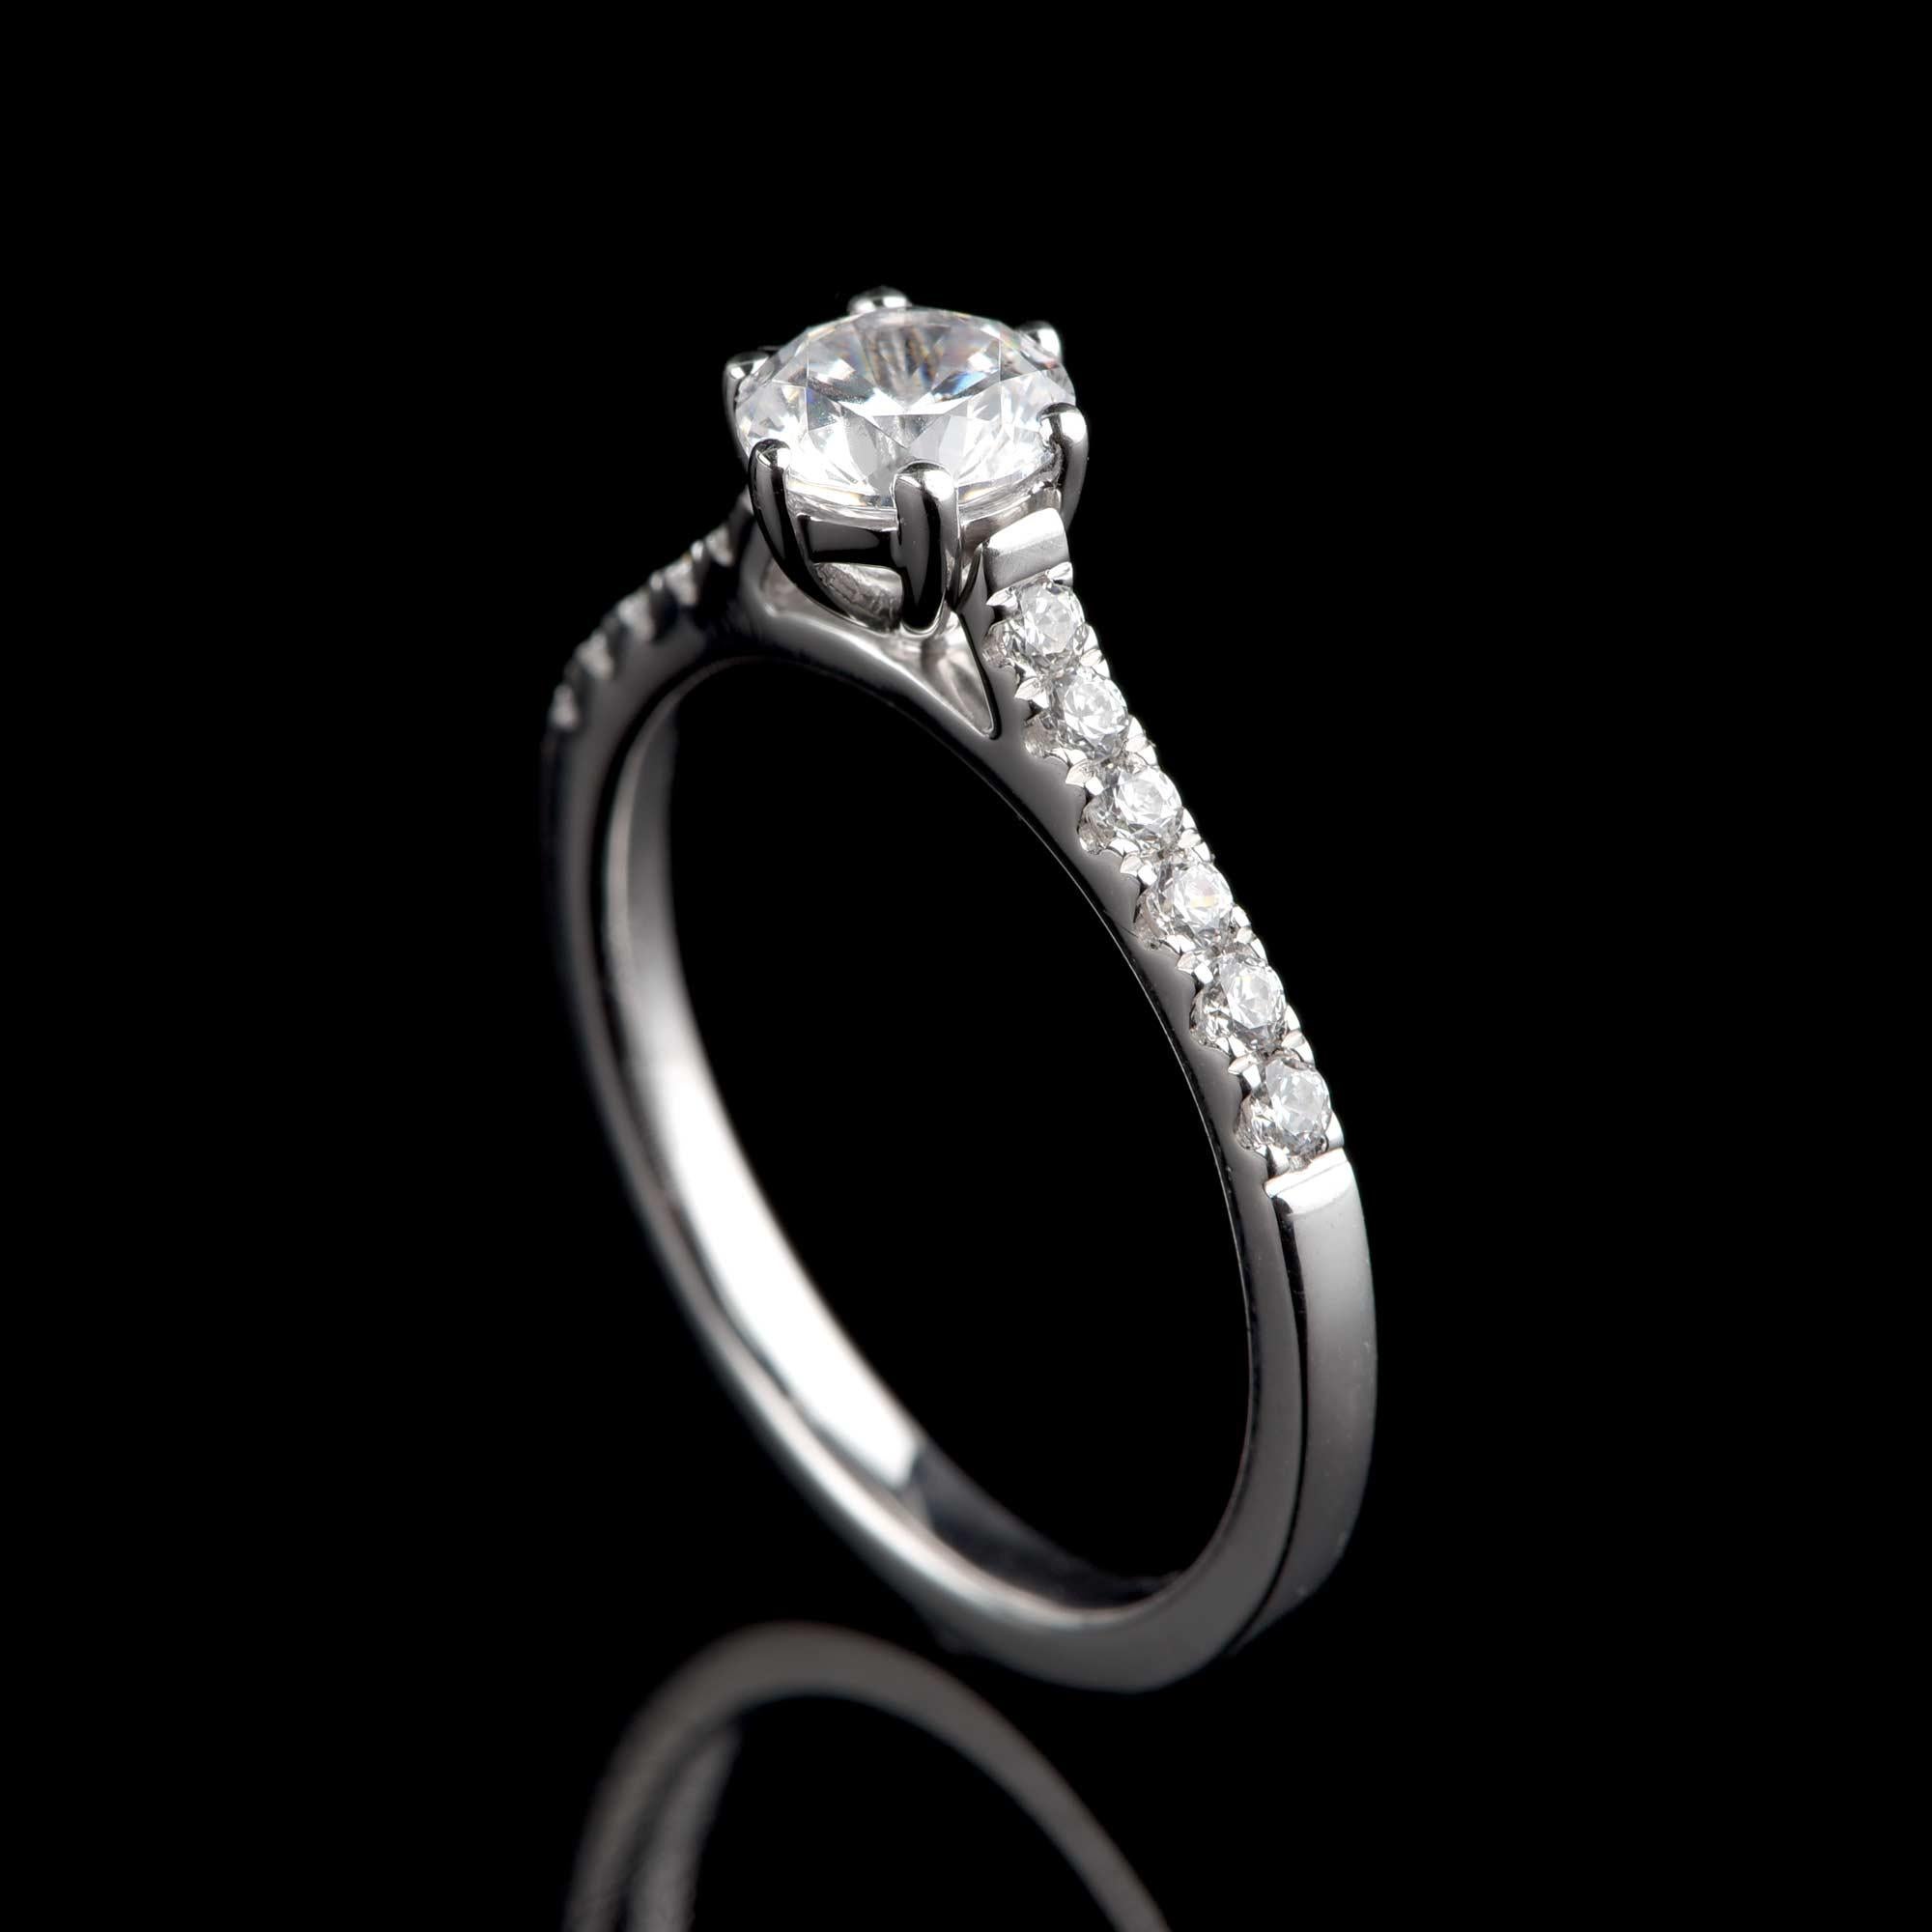 This classic bridal ring features 12 brilliant-cut diamonds and 1 GIA certified centre stone in prong setting and crafted in 18-karat white gold. The diamonds are graded H Color, SI1 Clarity.